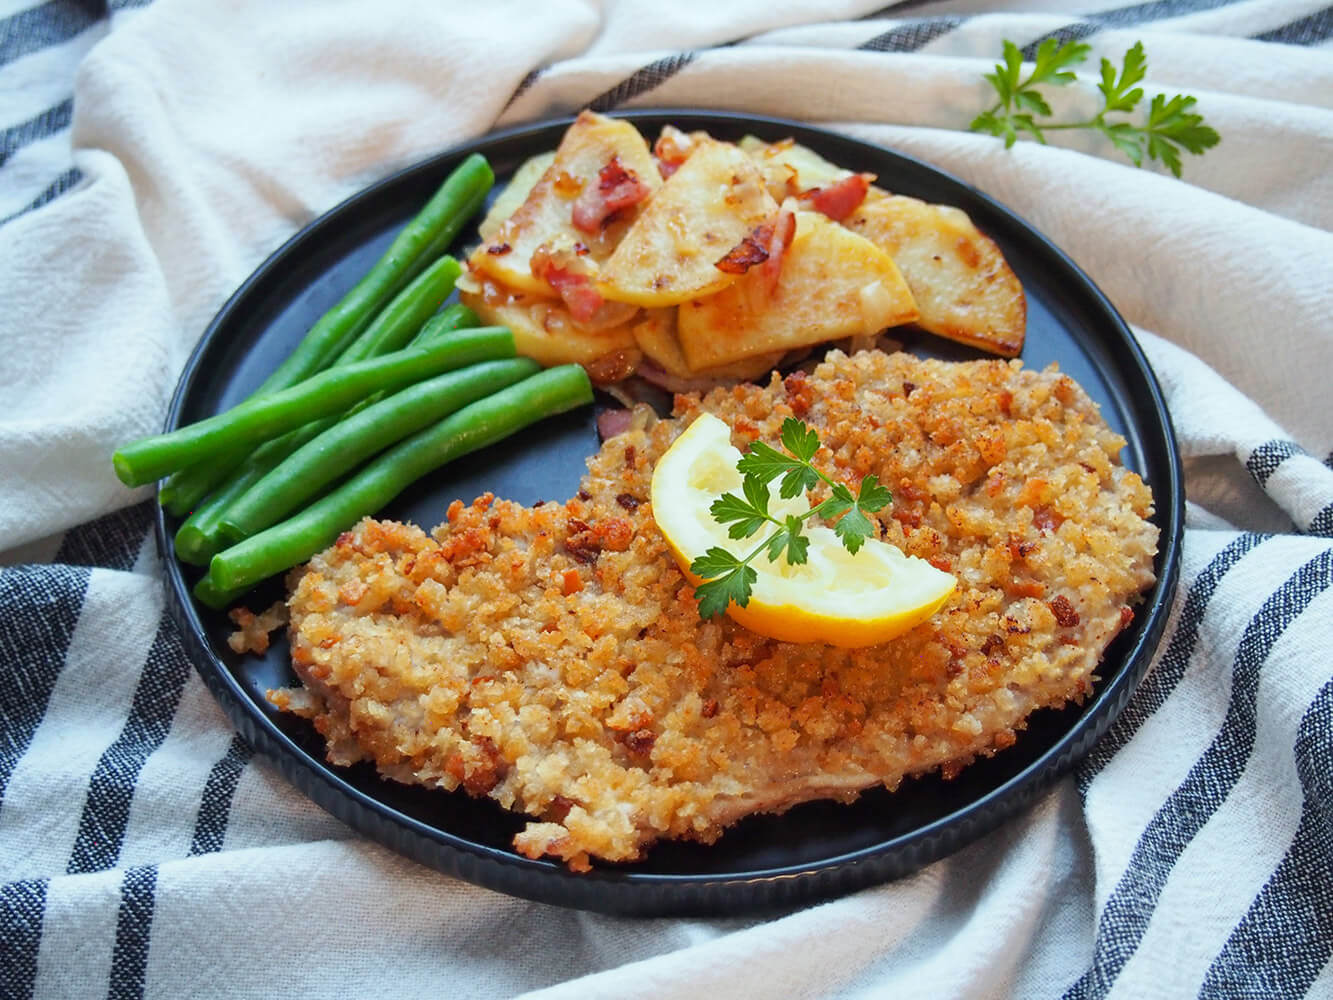 Wiener schnitzel on plate with potatoes and beans